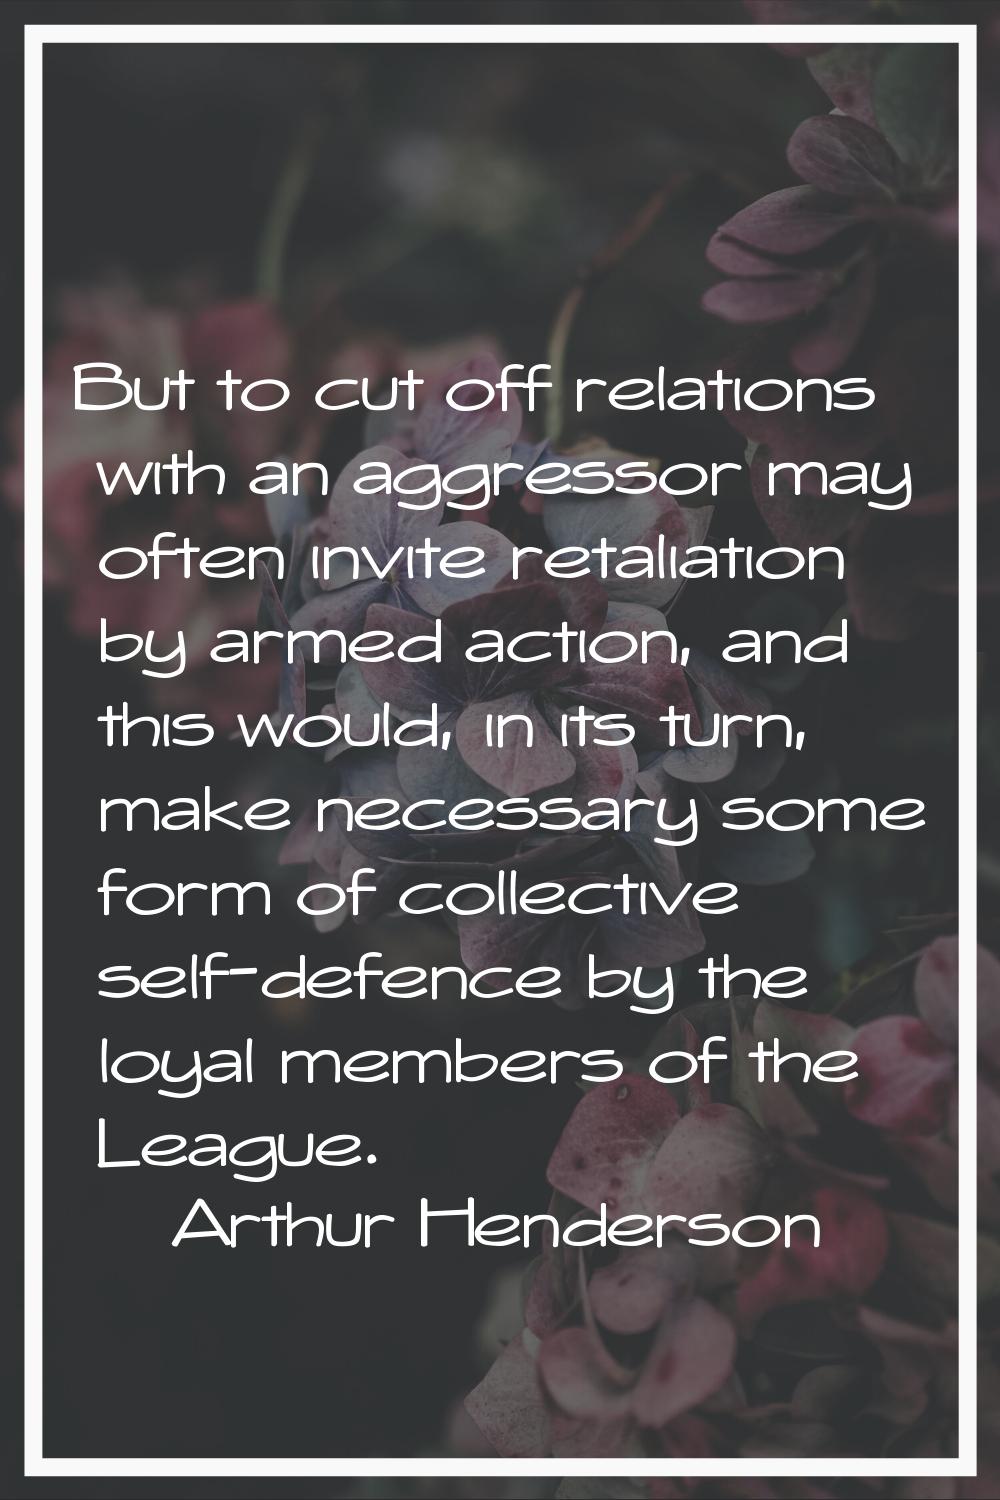 But to cut off relations with an aggressor may often invite retaliation by armed action, and this w